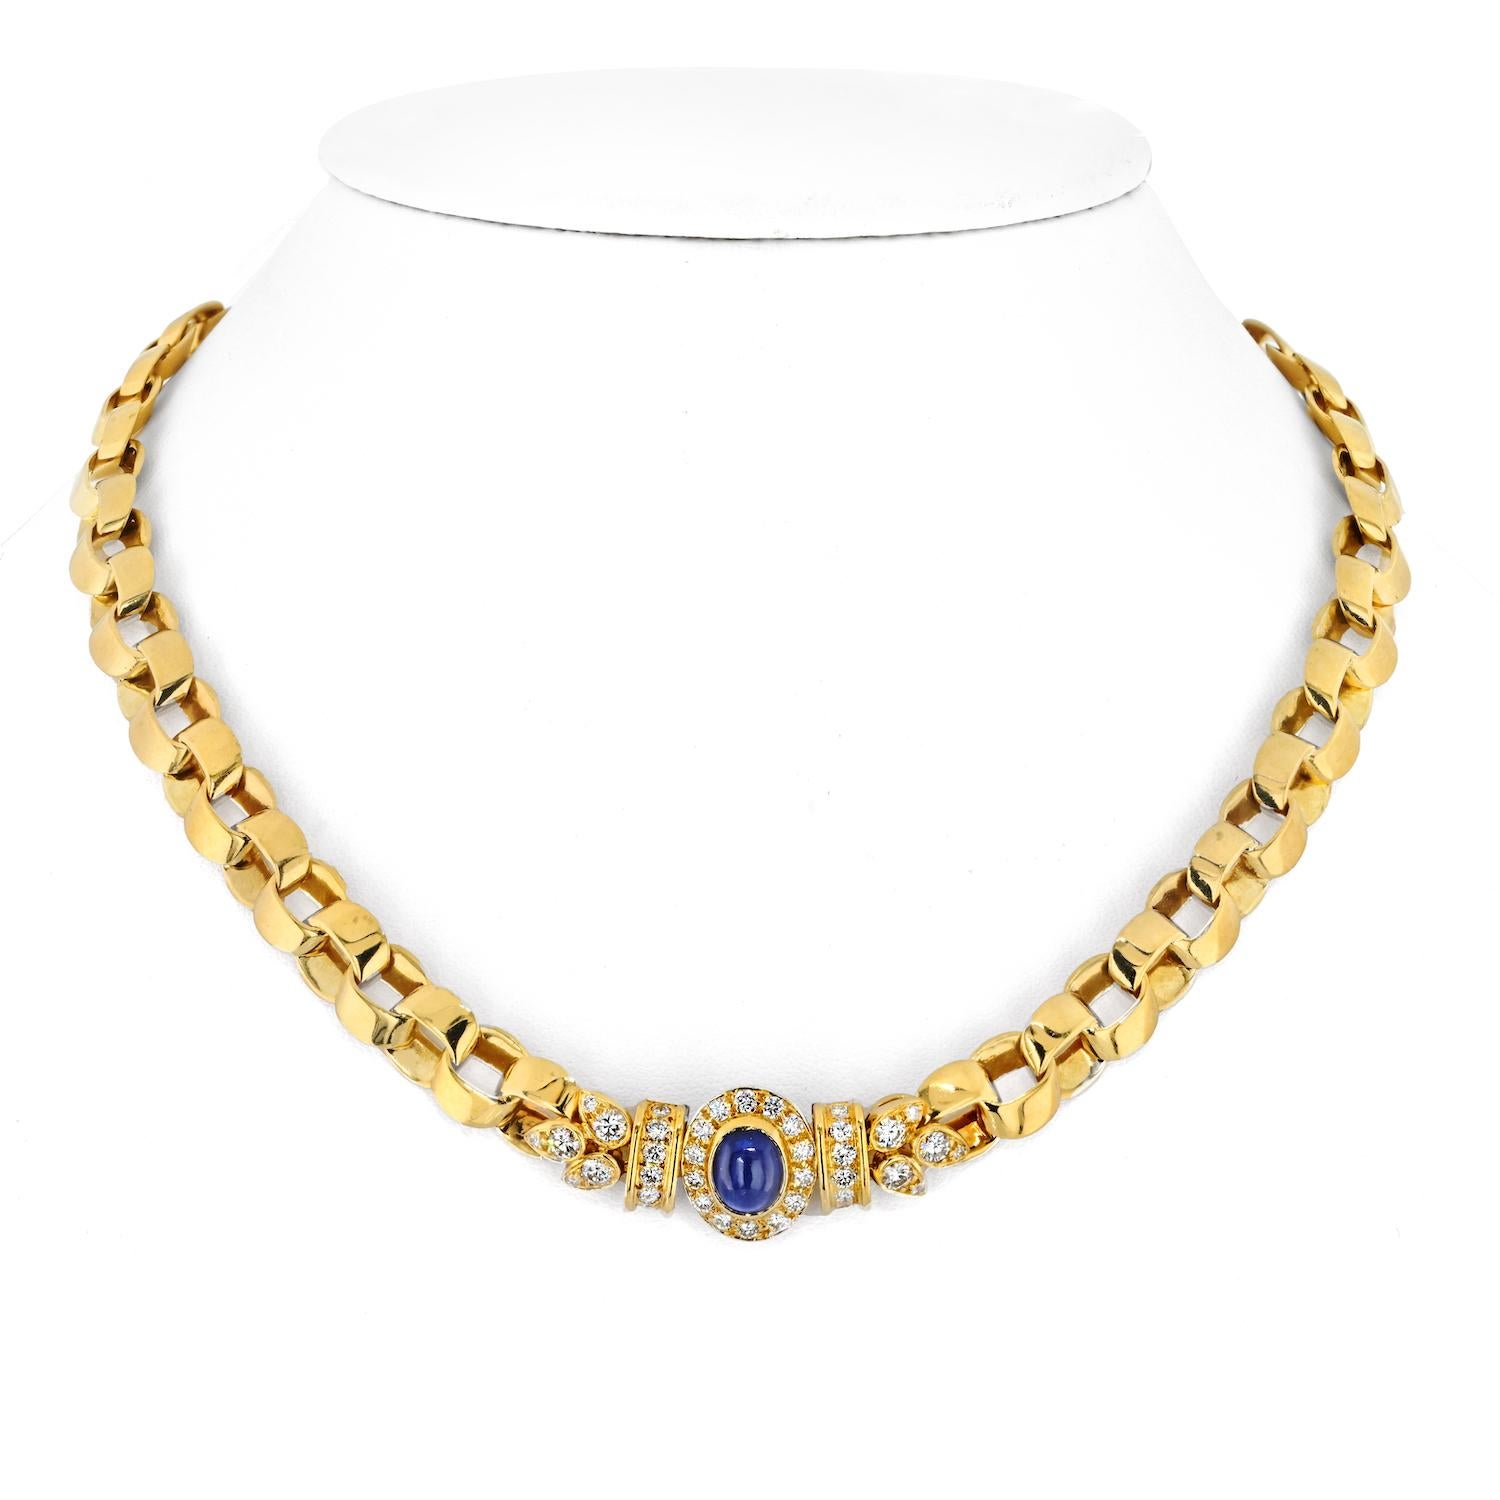 Indulge in the timeless elegance of this exquisite estate Van Cleef & Arpels necklace. Crafted with meticulous artistry, the necklace features a curb chain design that effortlessly combines sophistication and style. At its heart, a central station